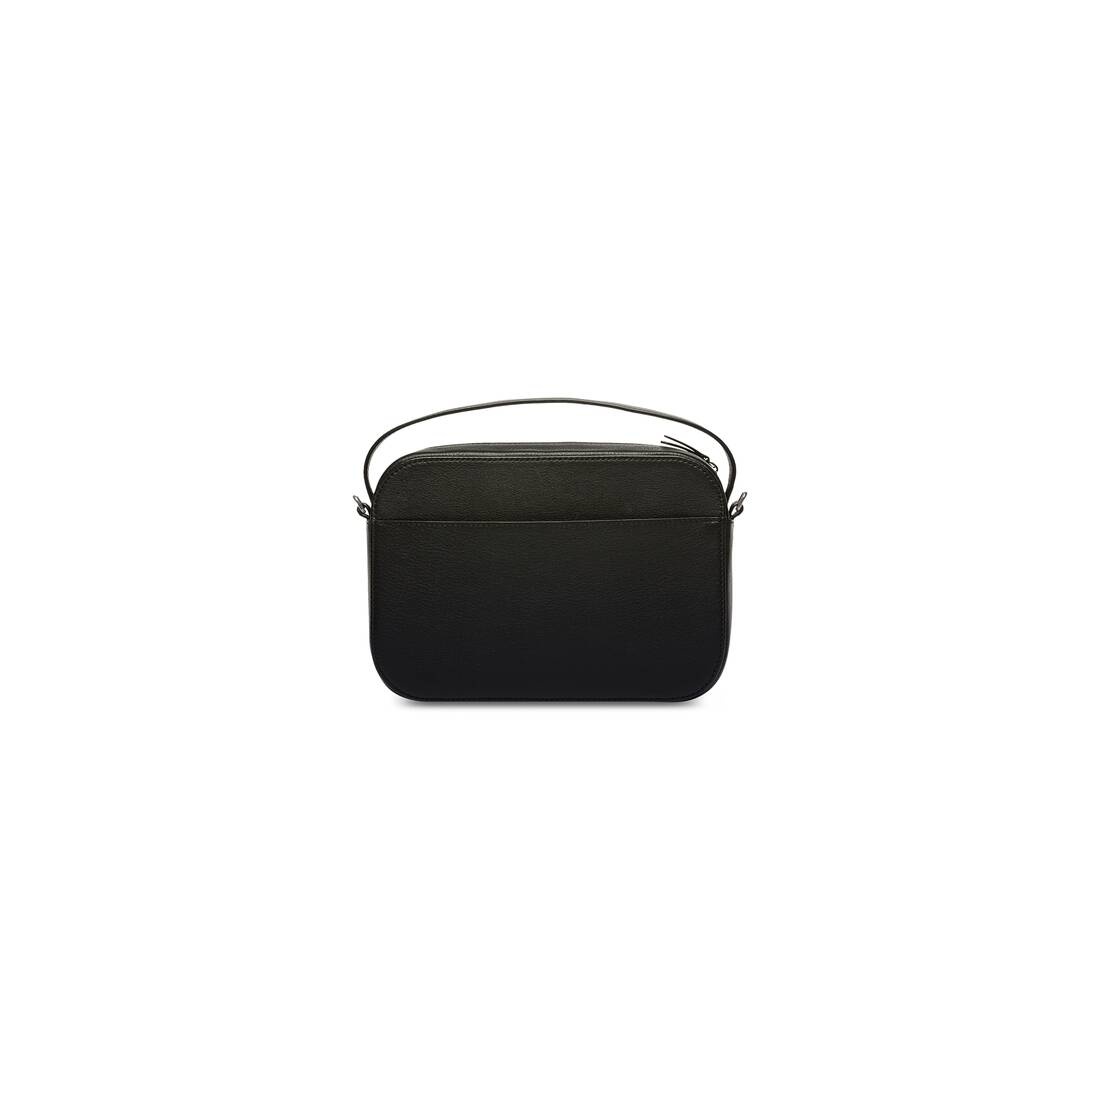 Women's Everyday Small Camera Bag in Black - 3